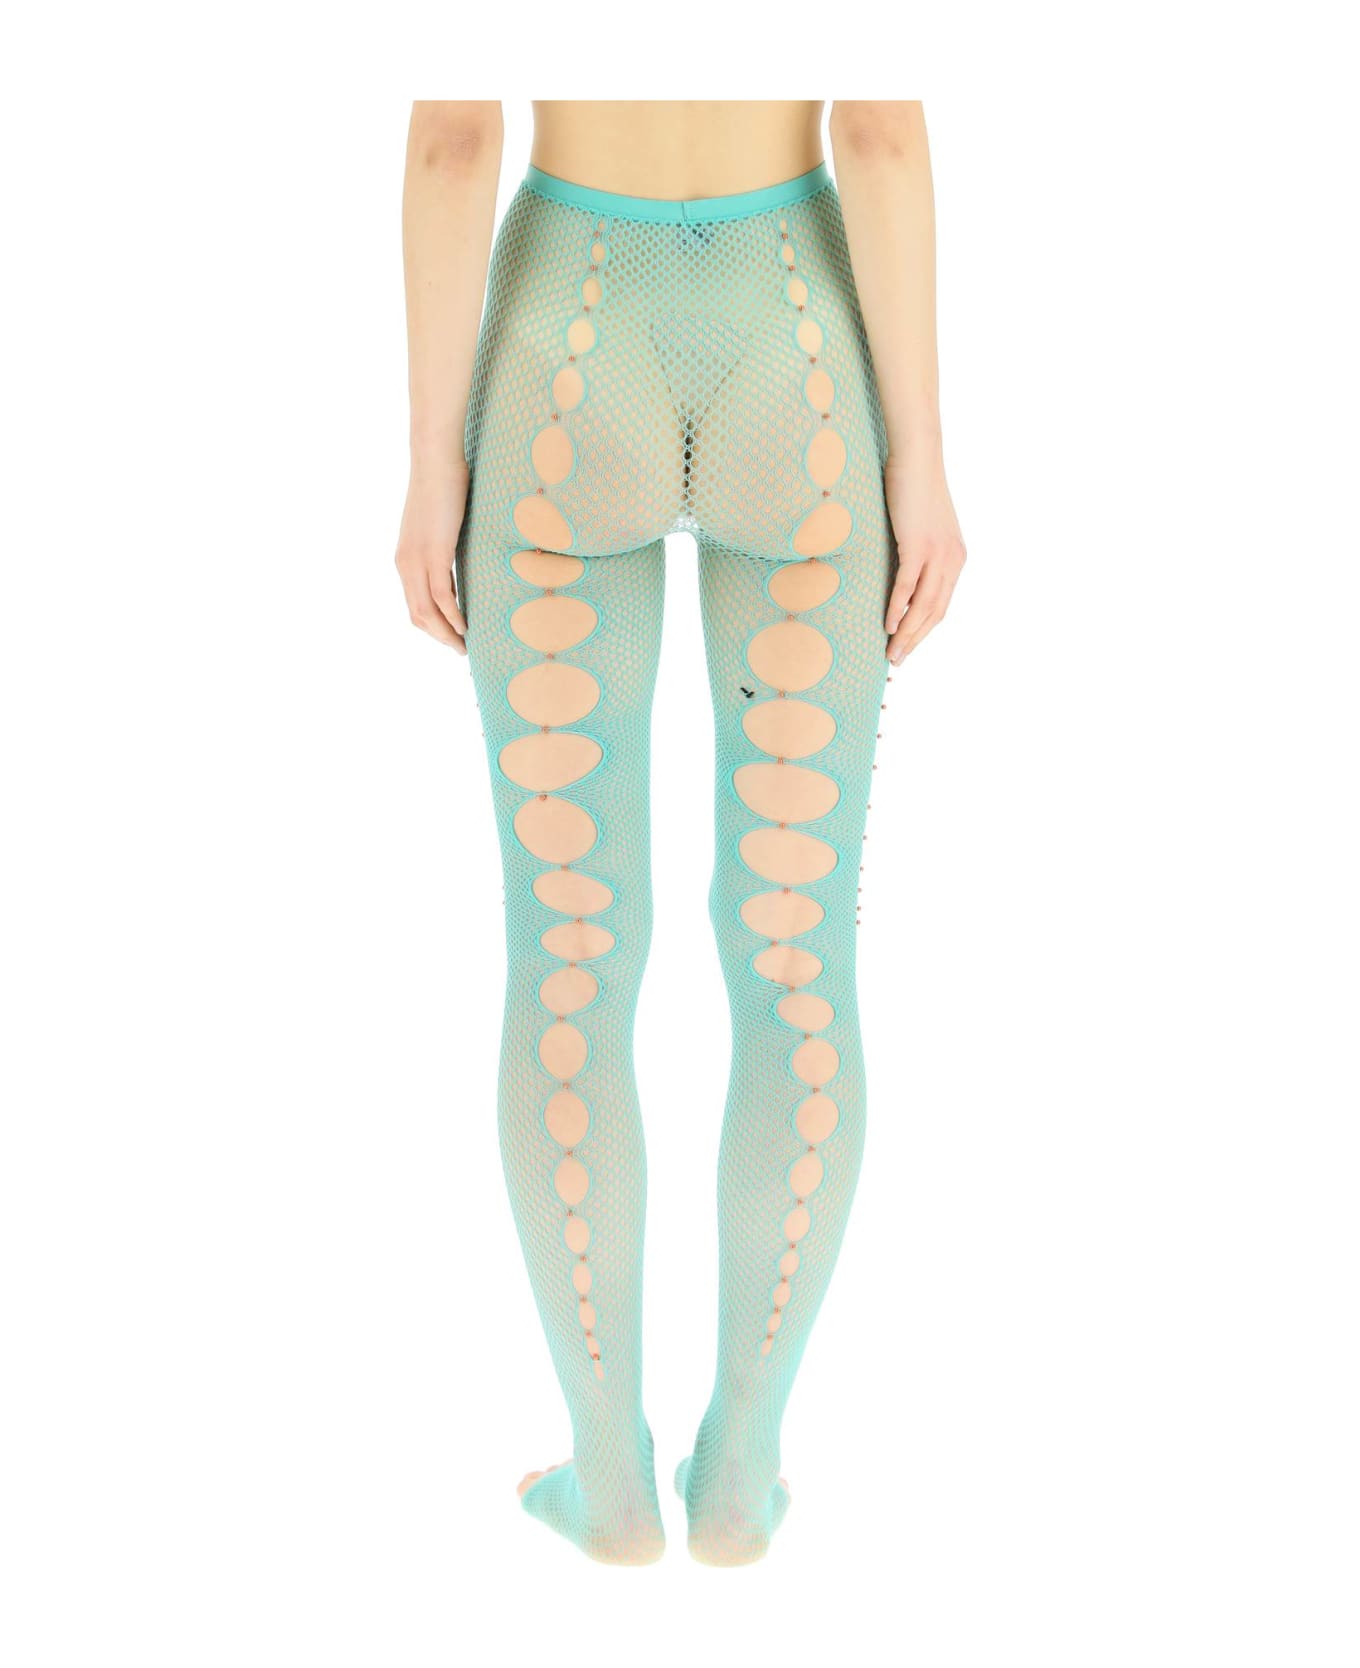 Rui Mesh Stockings With Cut-out And Beads - SEAFOAM (Green)